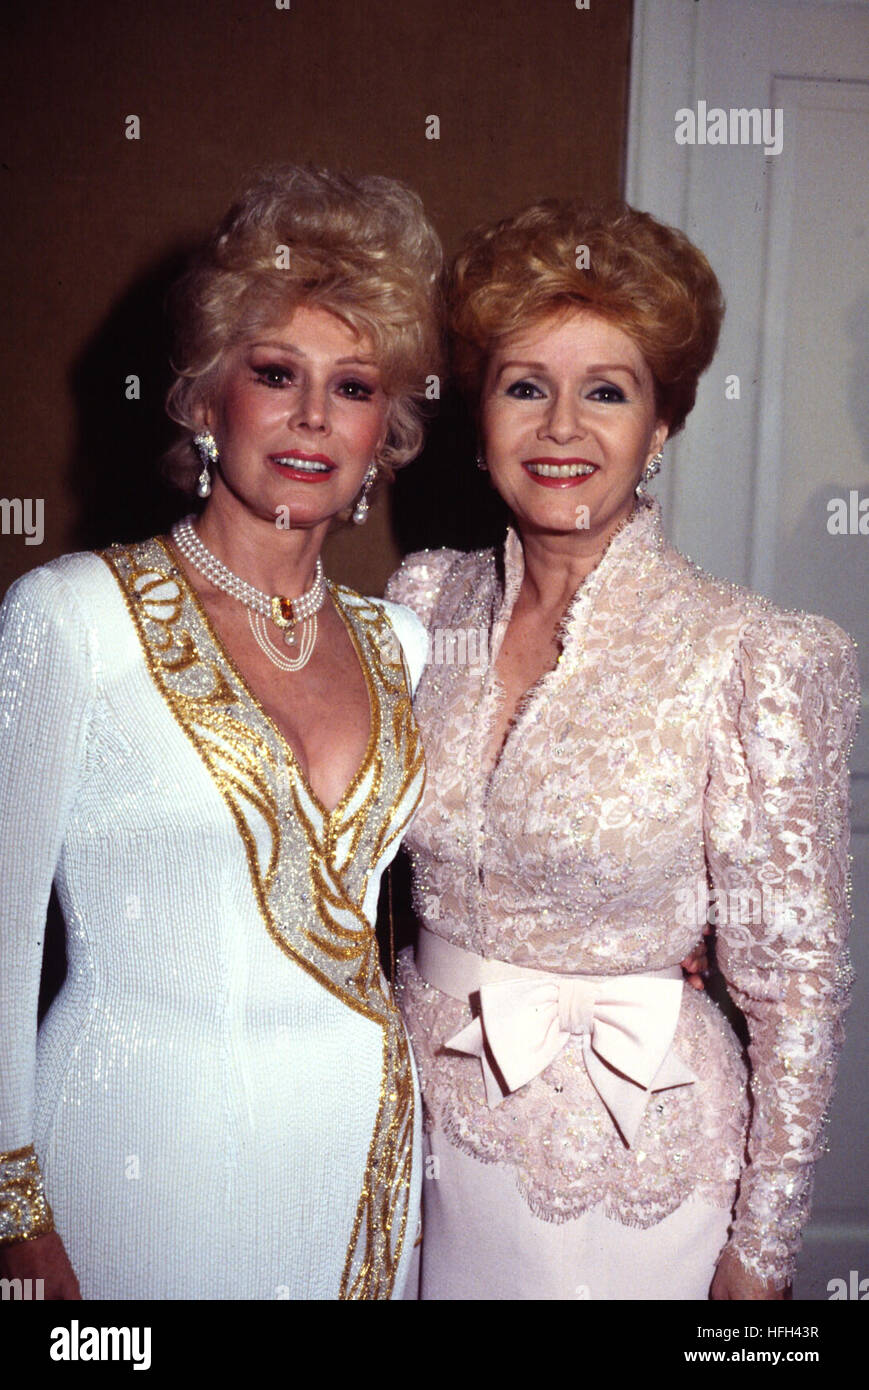 Pittsburgh, Pennsylvania, USA. June 13, 1988.  Eva Gabor and Debbie Reynolds at the Civic Light Opera 'Together Again' Gala, Pittsburgh, Pennsylvania, USA.  Gabor and Reynolds were among the celebrities attending a special preview performance of the Civic Light Opera's season opener, 'Together Again,' starring Donald O'Connor and Debbie Reynolds. Credit: Amy Cicconi/Alamy Live News Stock Photo